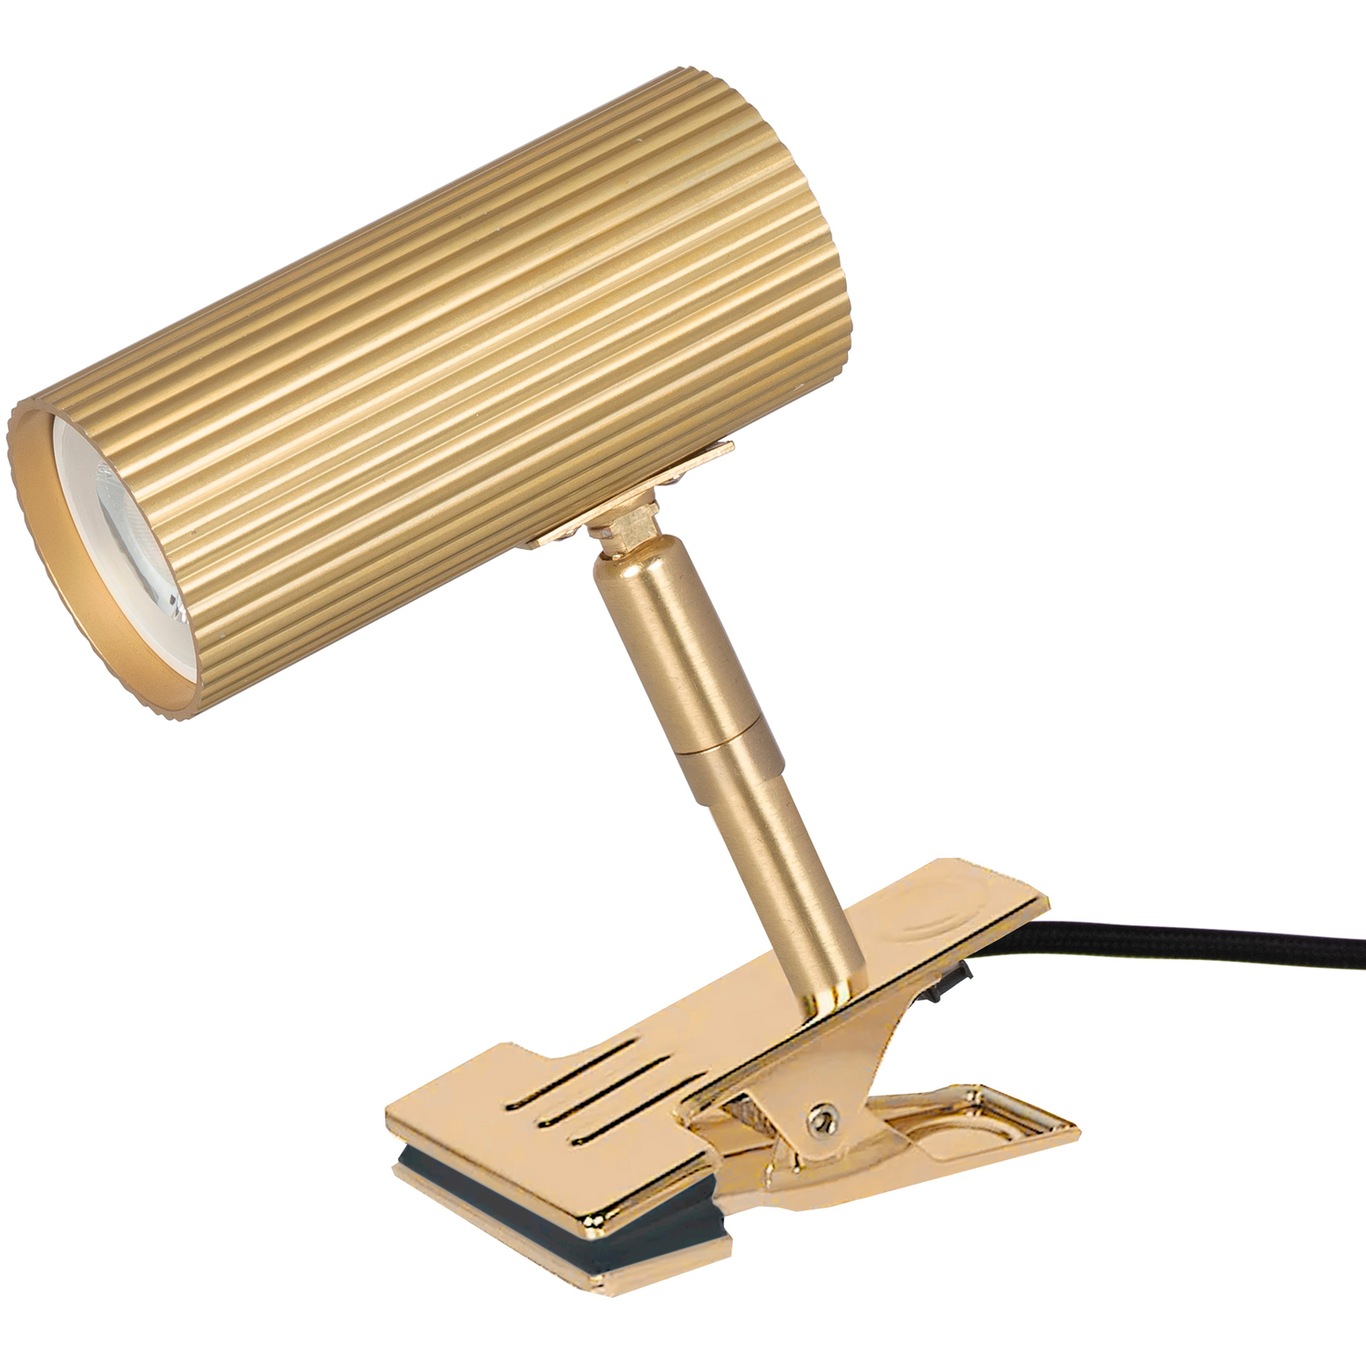 Hubble Klemlampe, Brushed brass